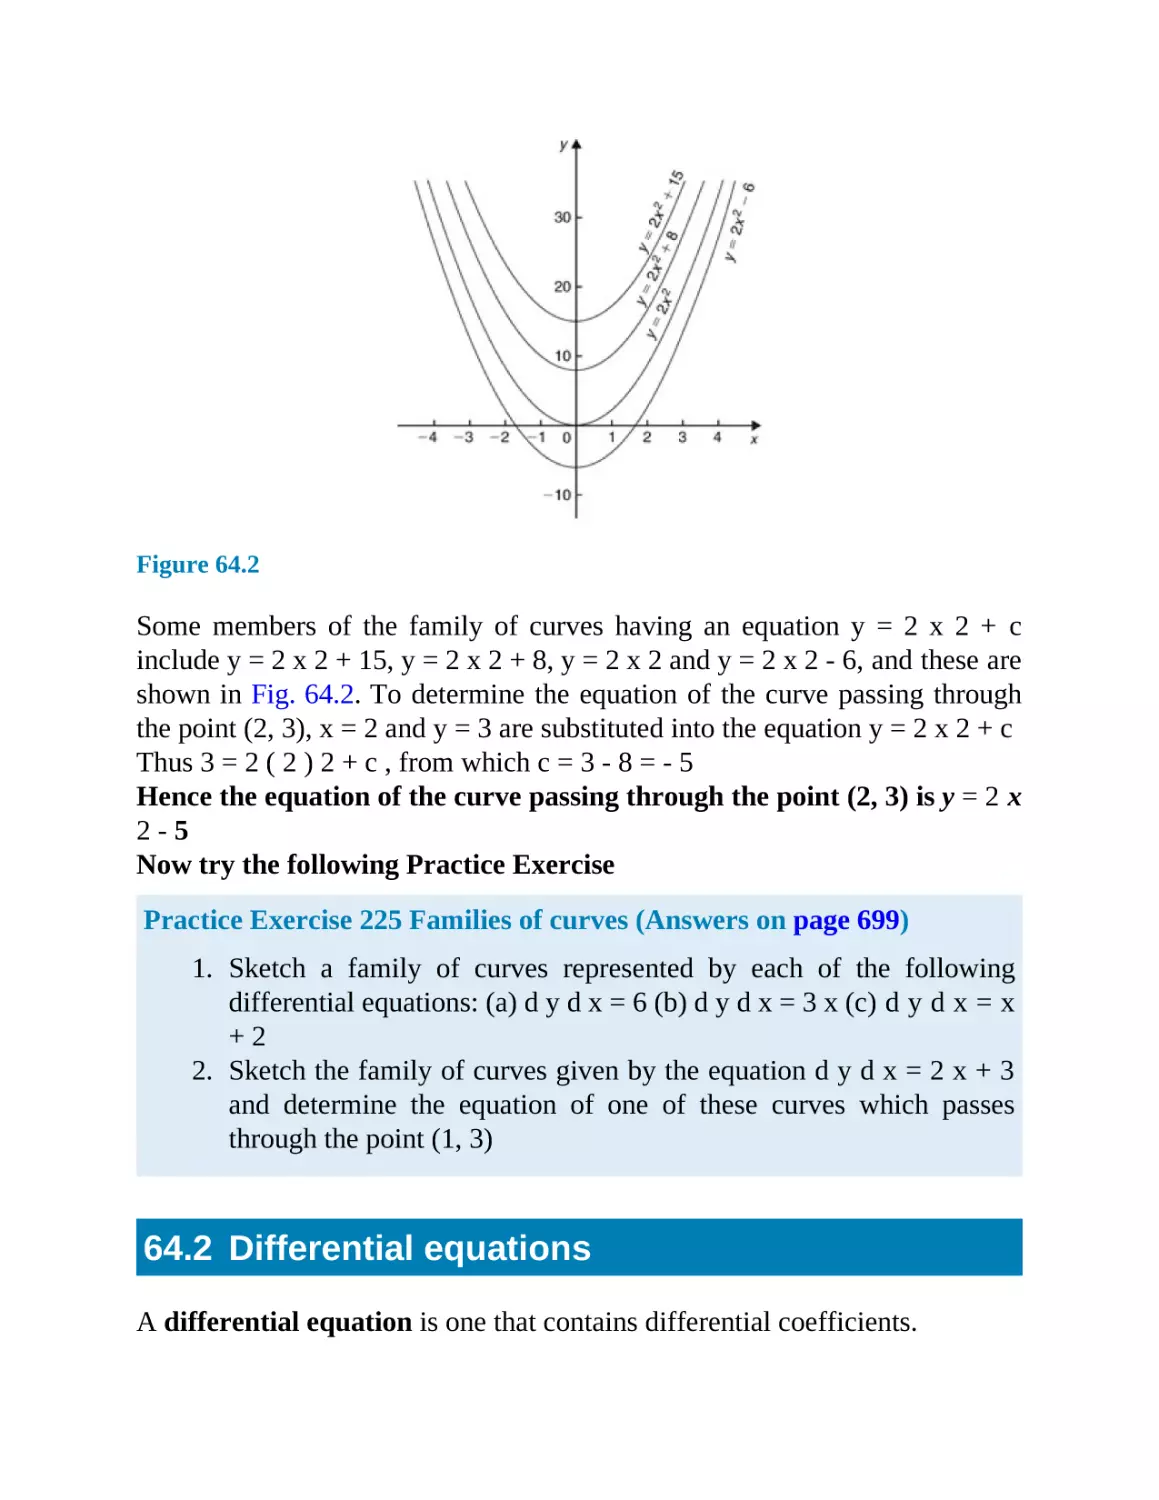 64.2 Differential equations